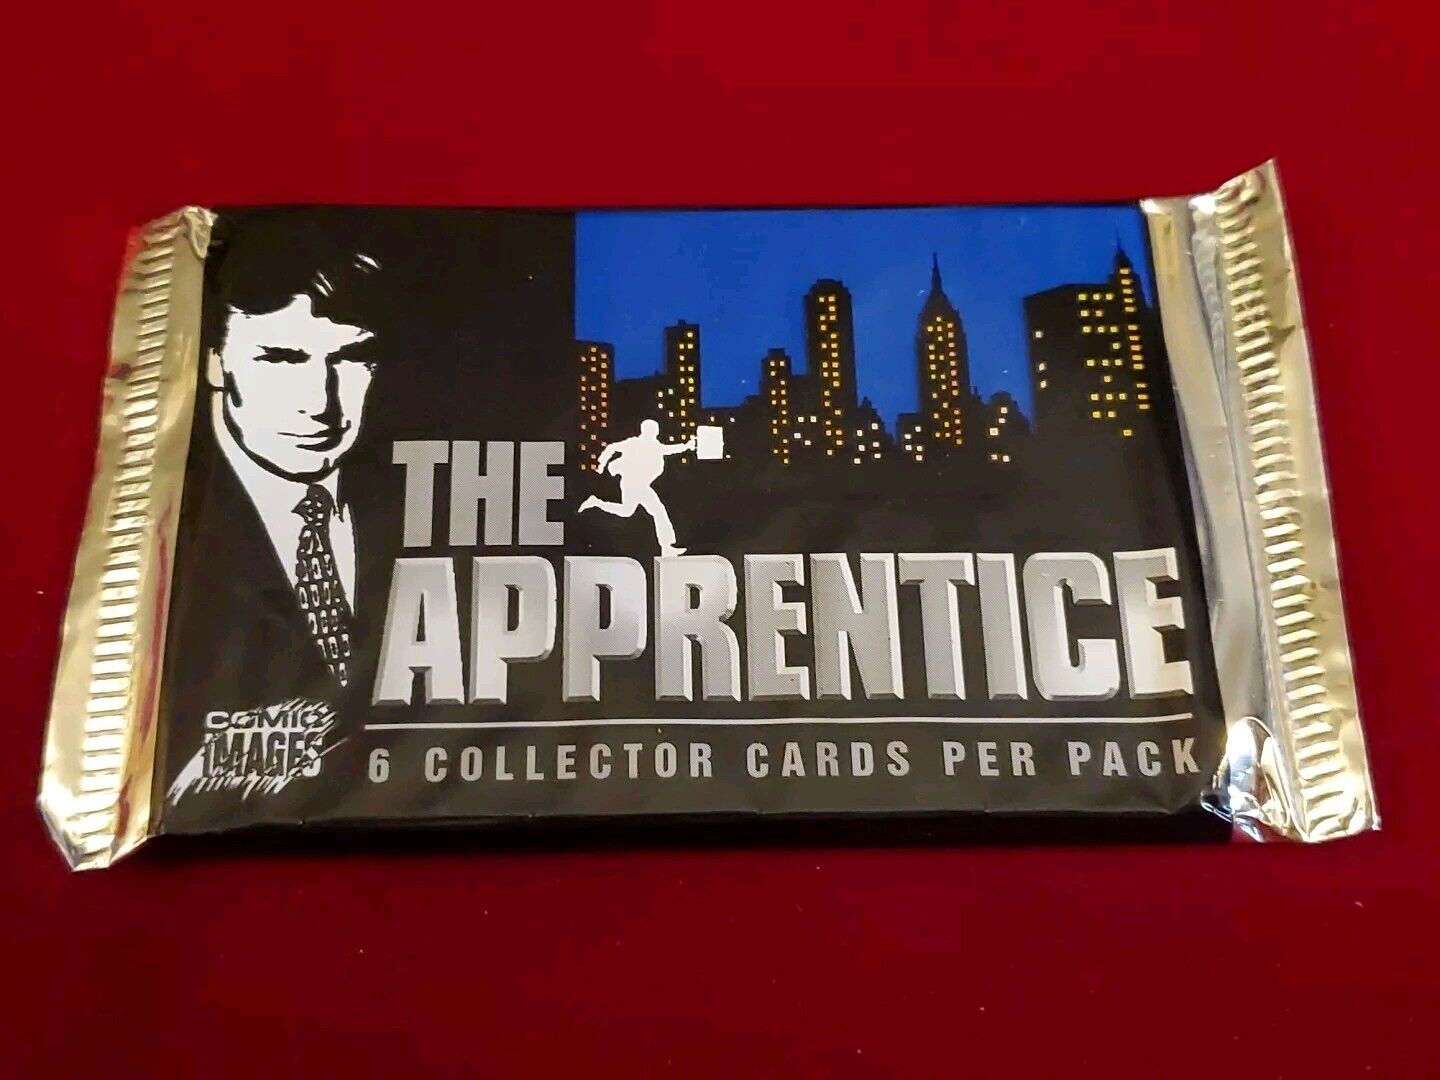 The Apprentice Trading Cards Donald Trump Comic Images 2005 Sealed Pack